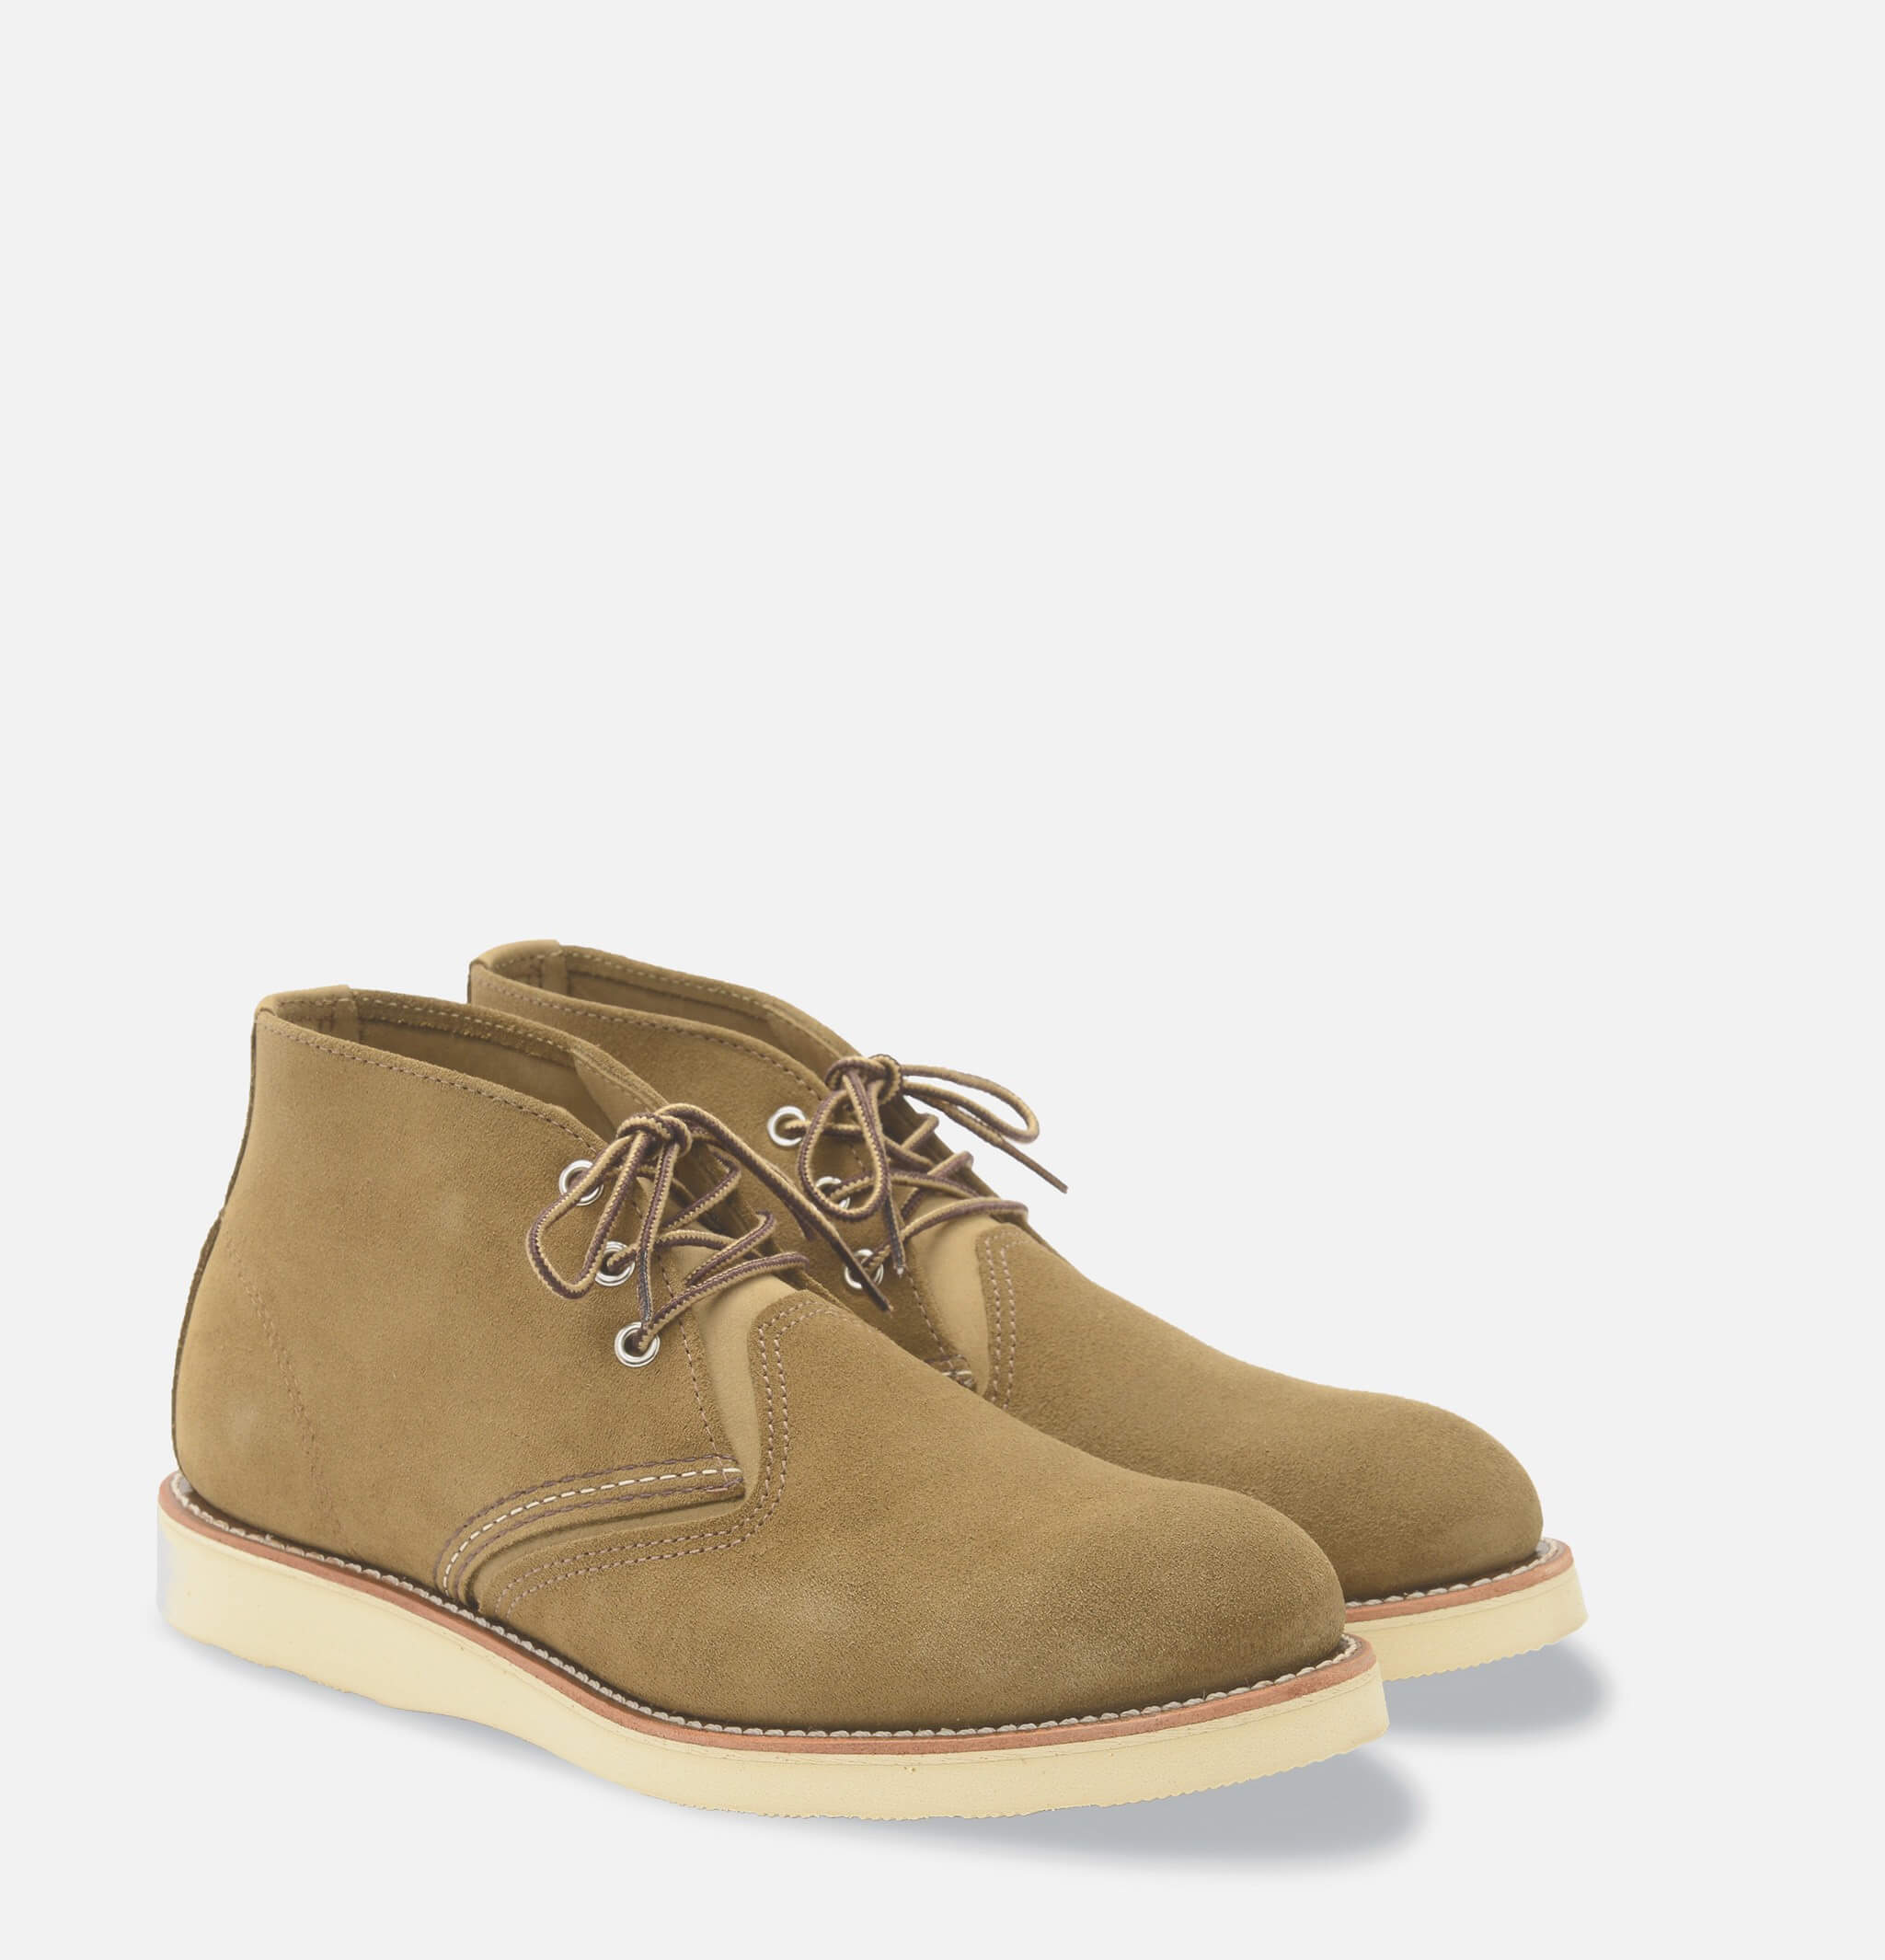 Red Wing Shoes - 3149 - Work Chukka - Olive Mohave